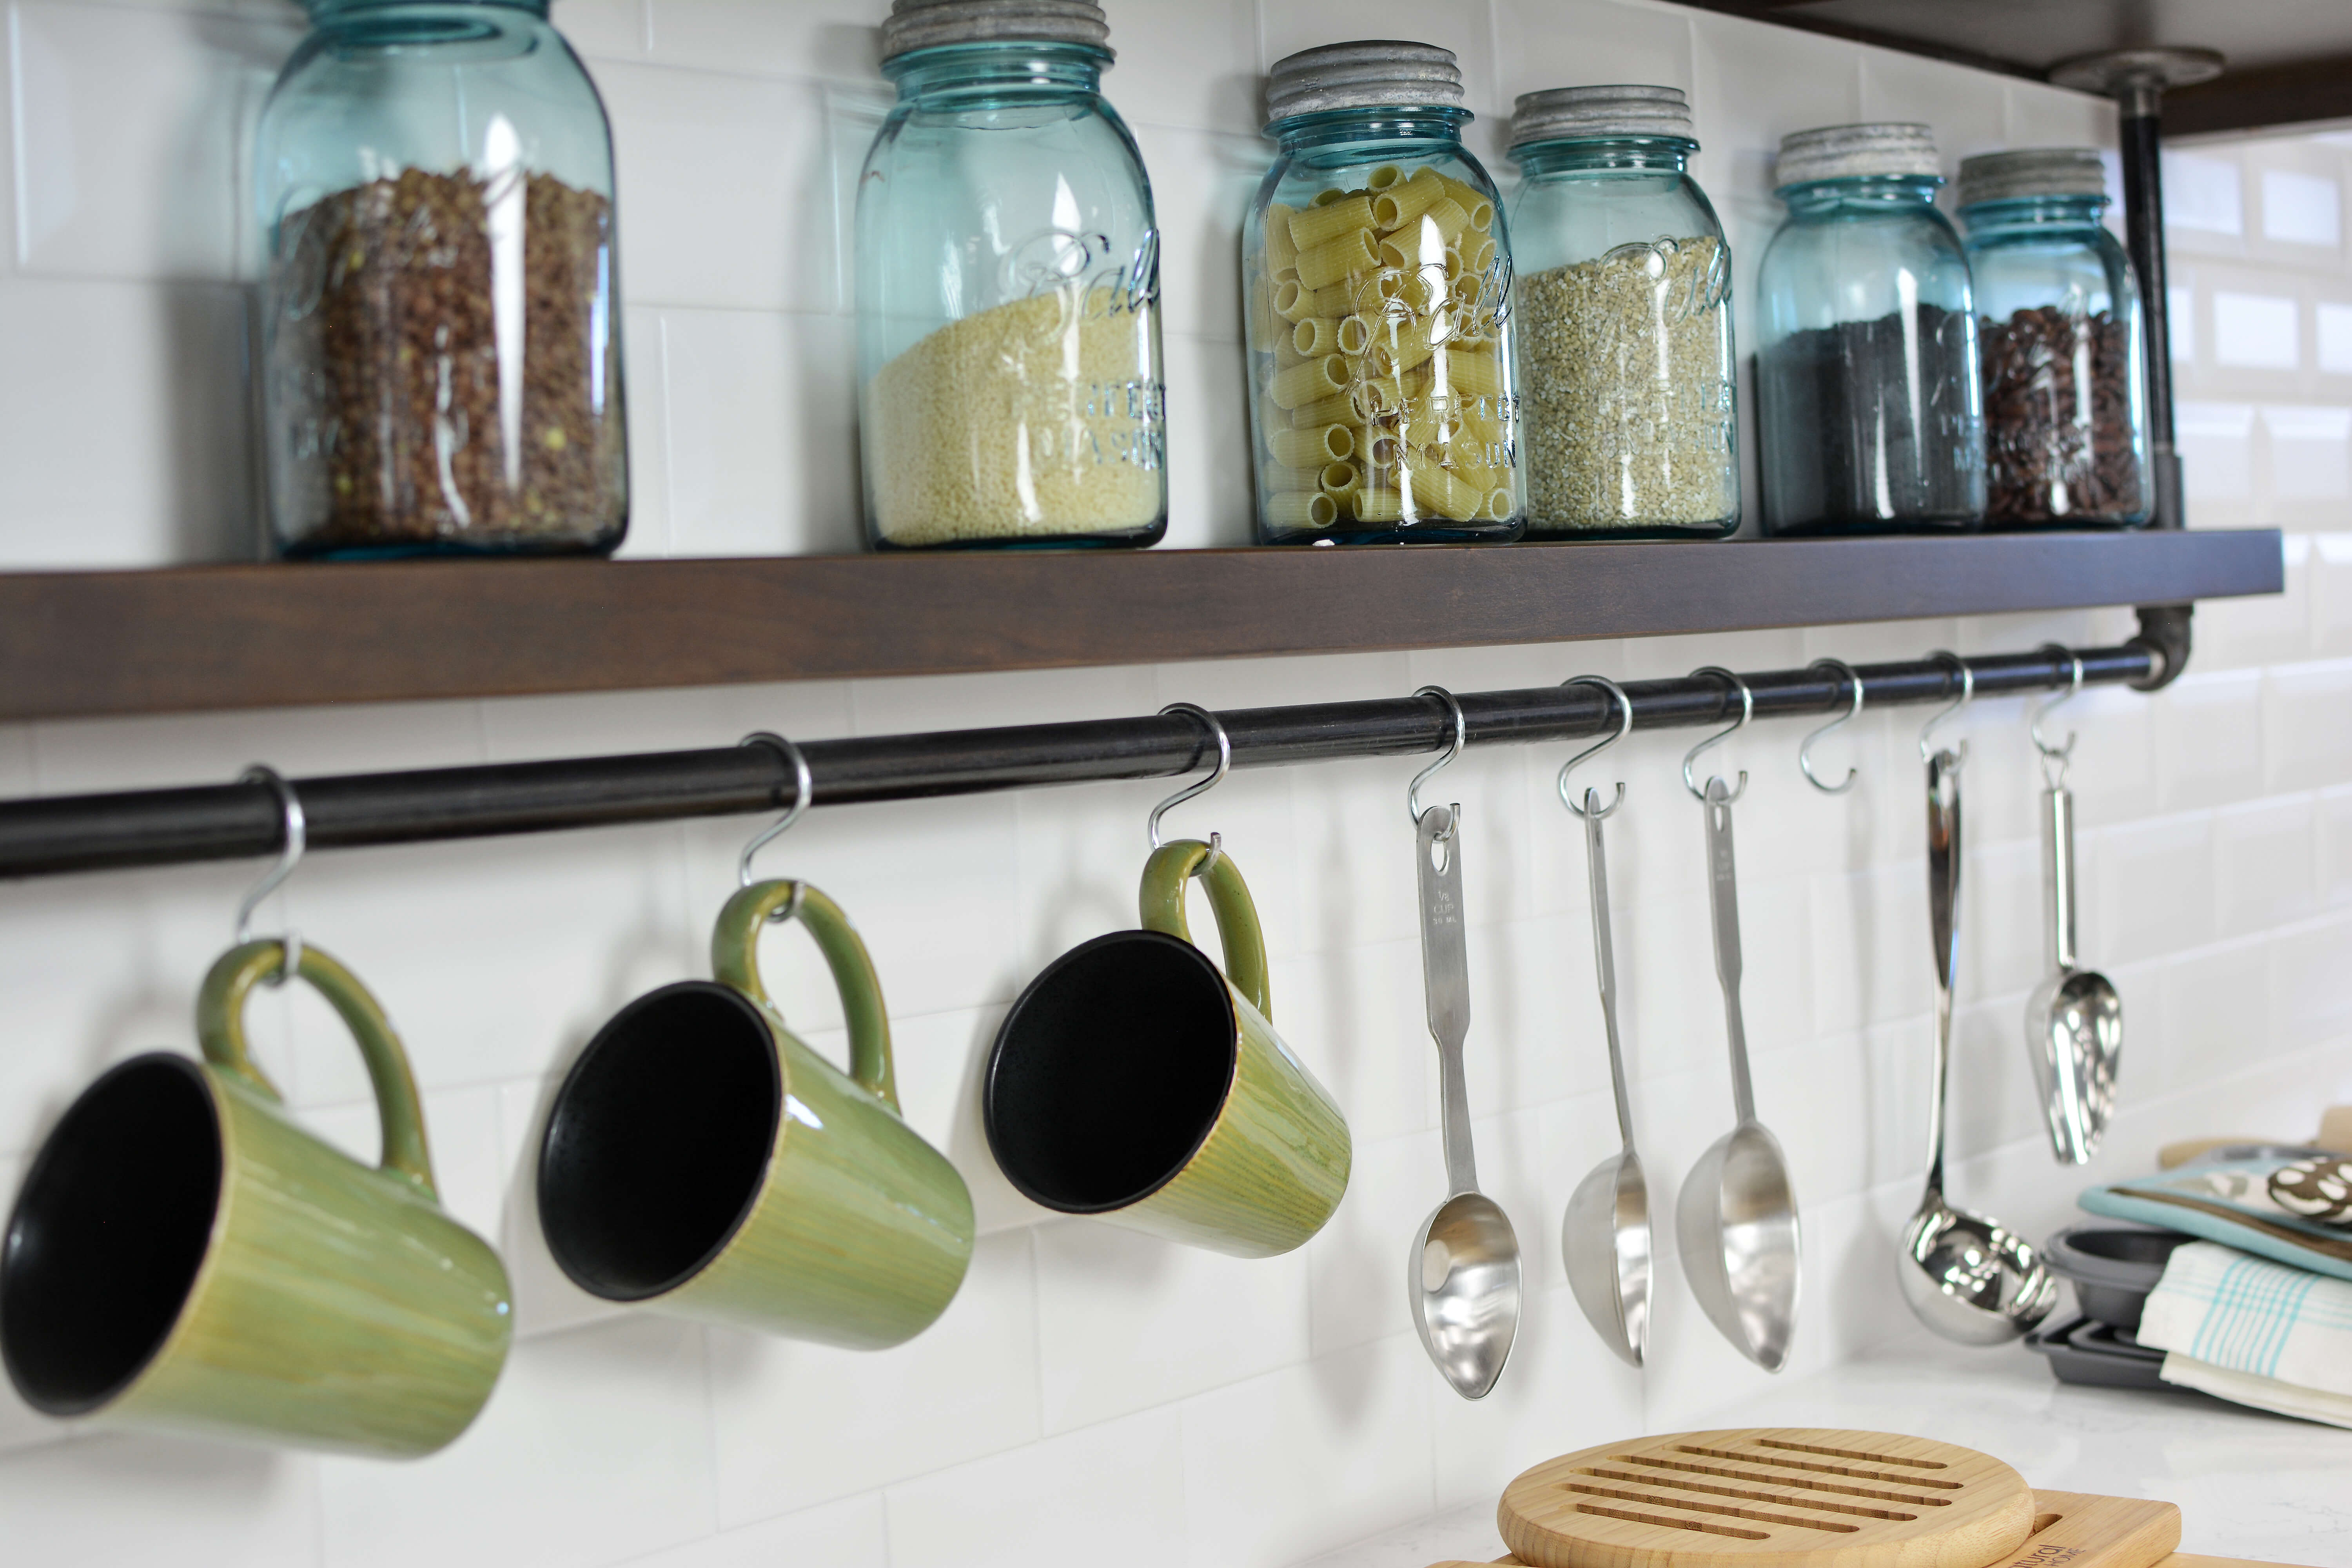 In this kitchen, an industrial style shelf hangs from the wall cabinets with hanging coffee cup storage. This feature is placed strategically within a close distance to the coffee station.